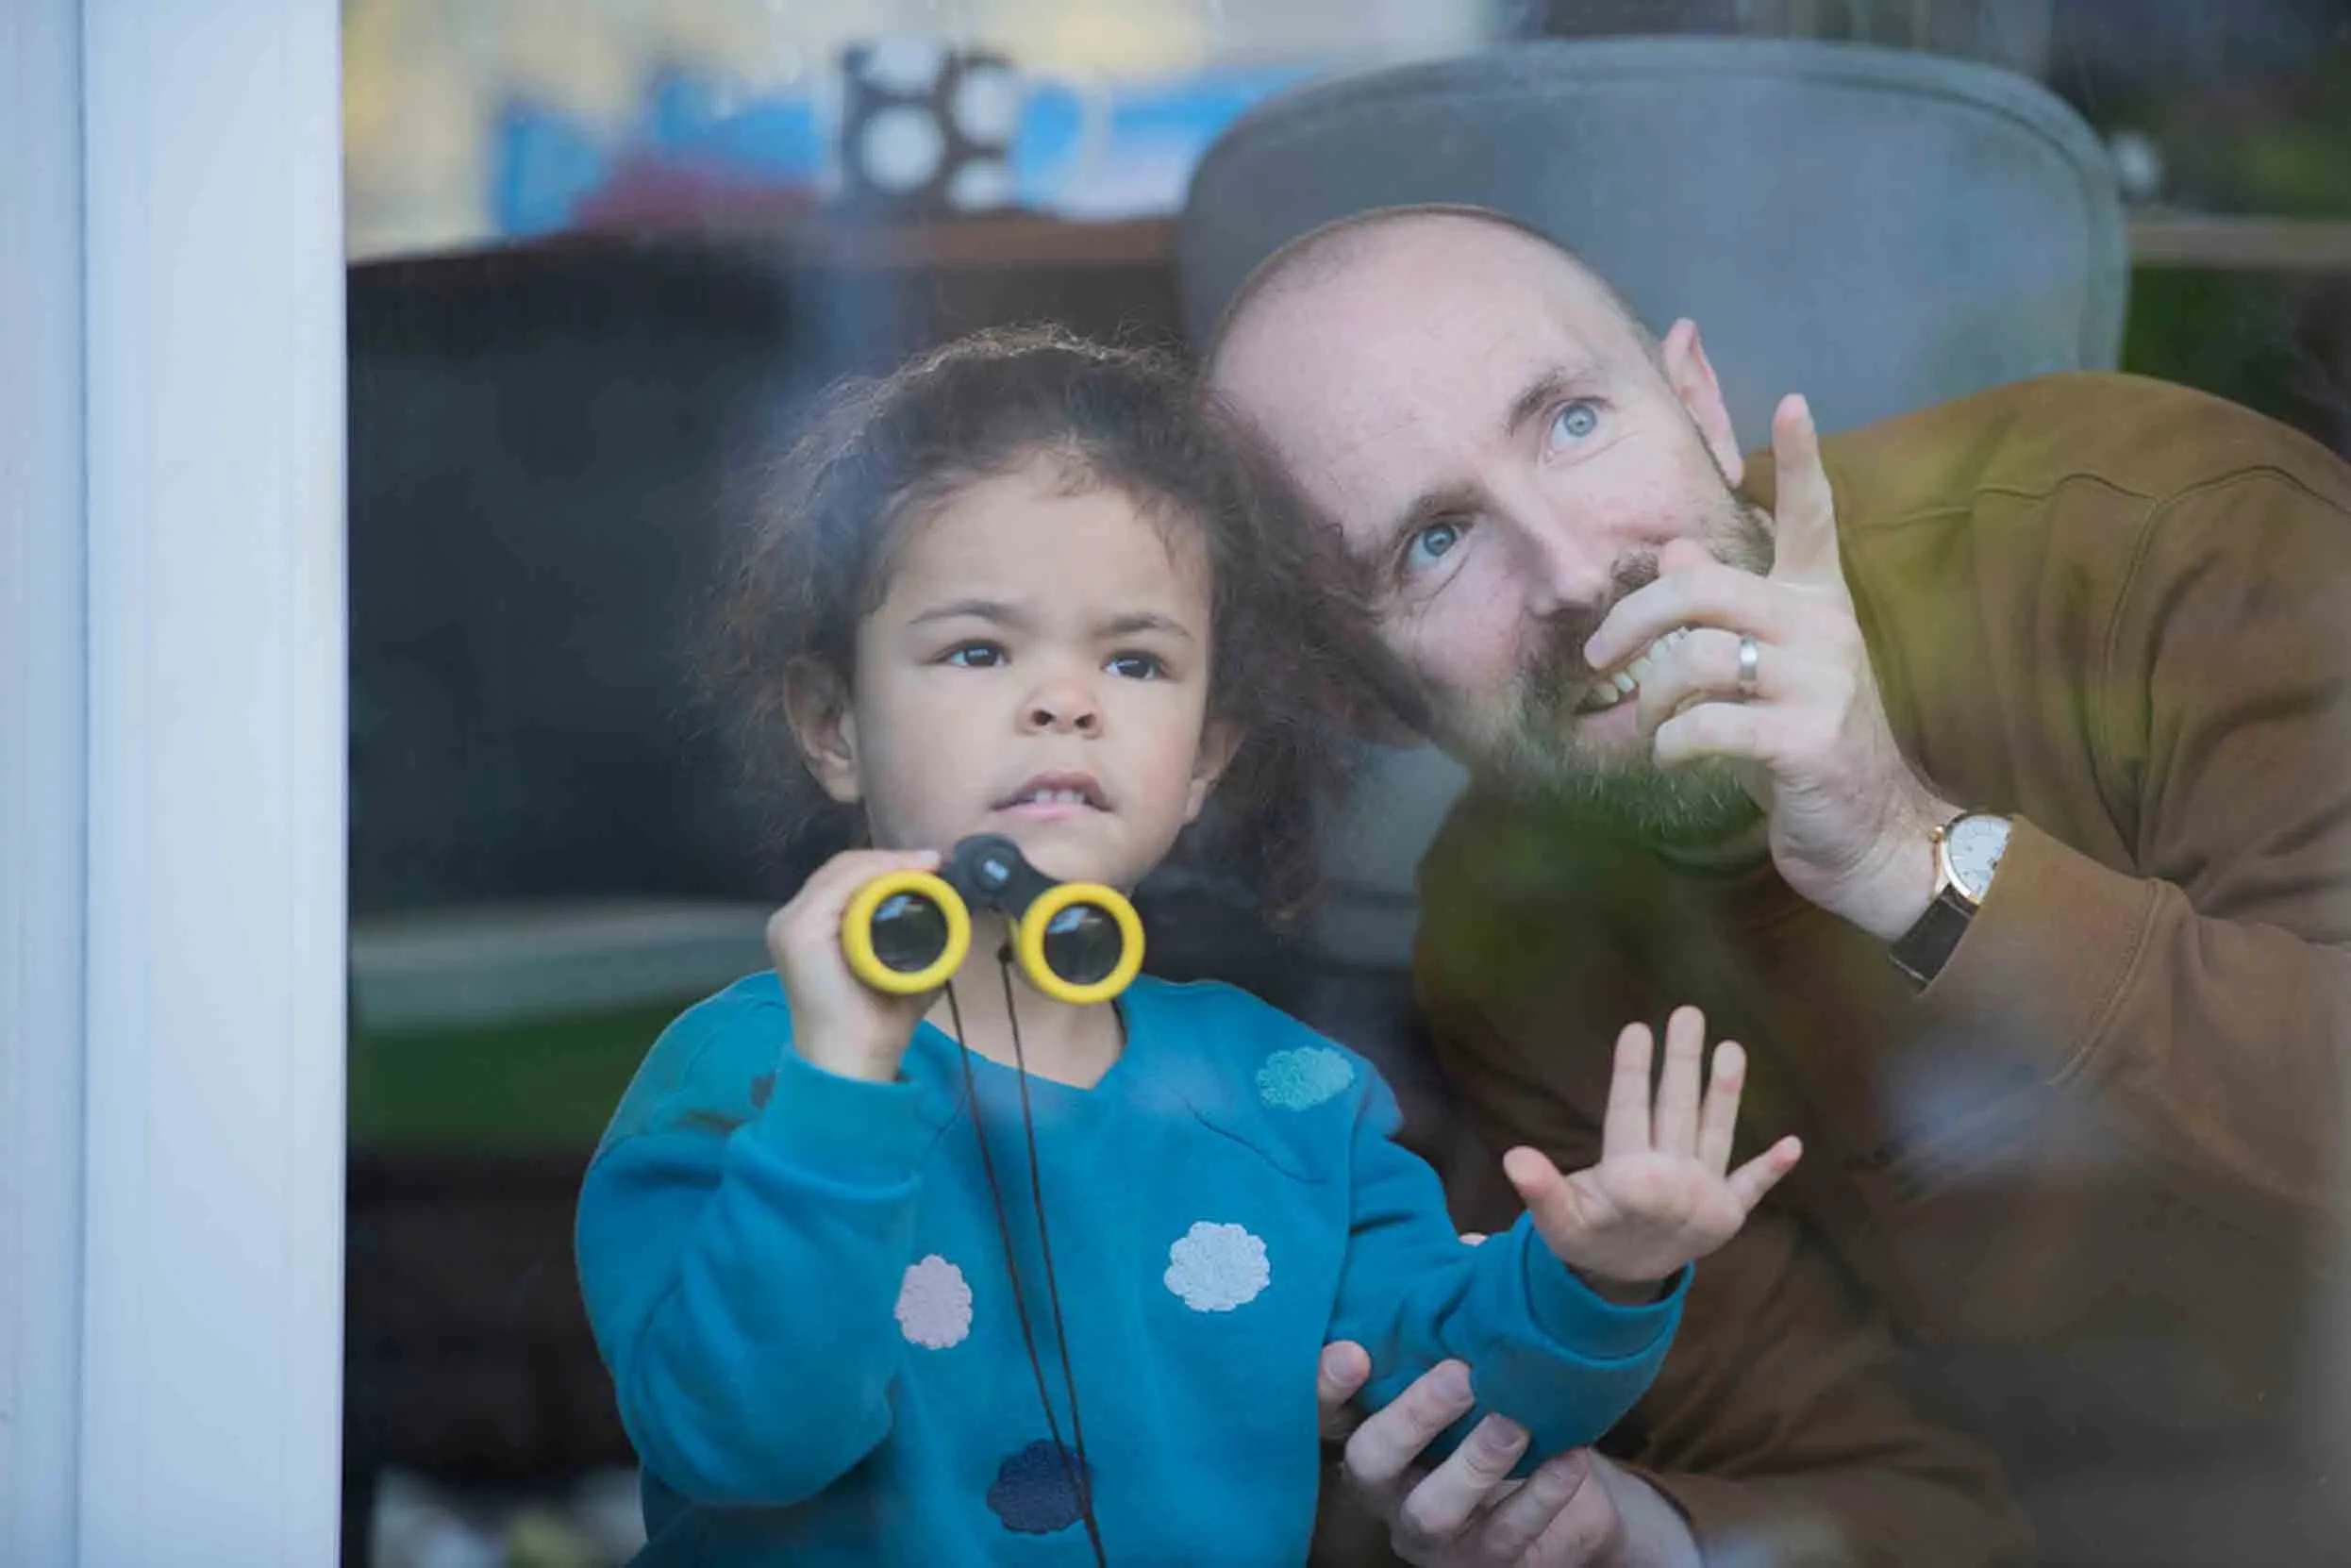 An adult and a small child birdwatching from inside a house, behind a large window. The child is holding yellow binoculars and the adult is smiling and pointing to something outside.